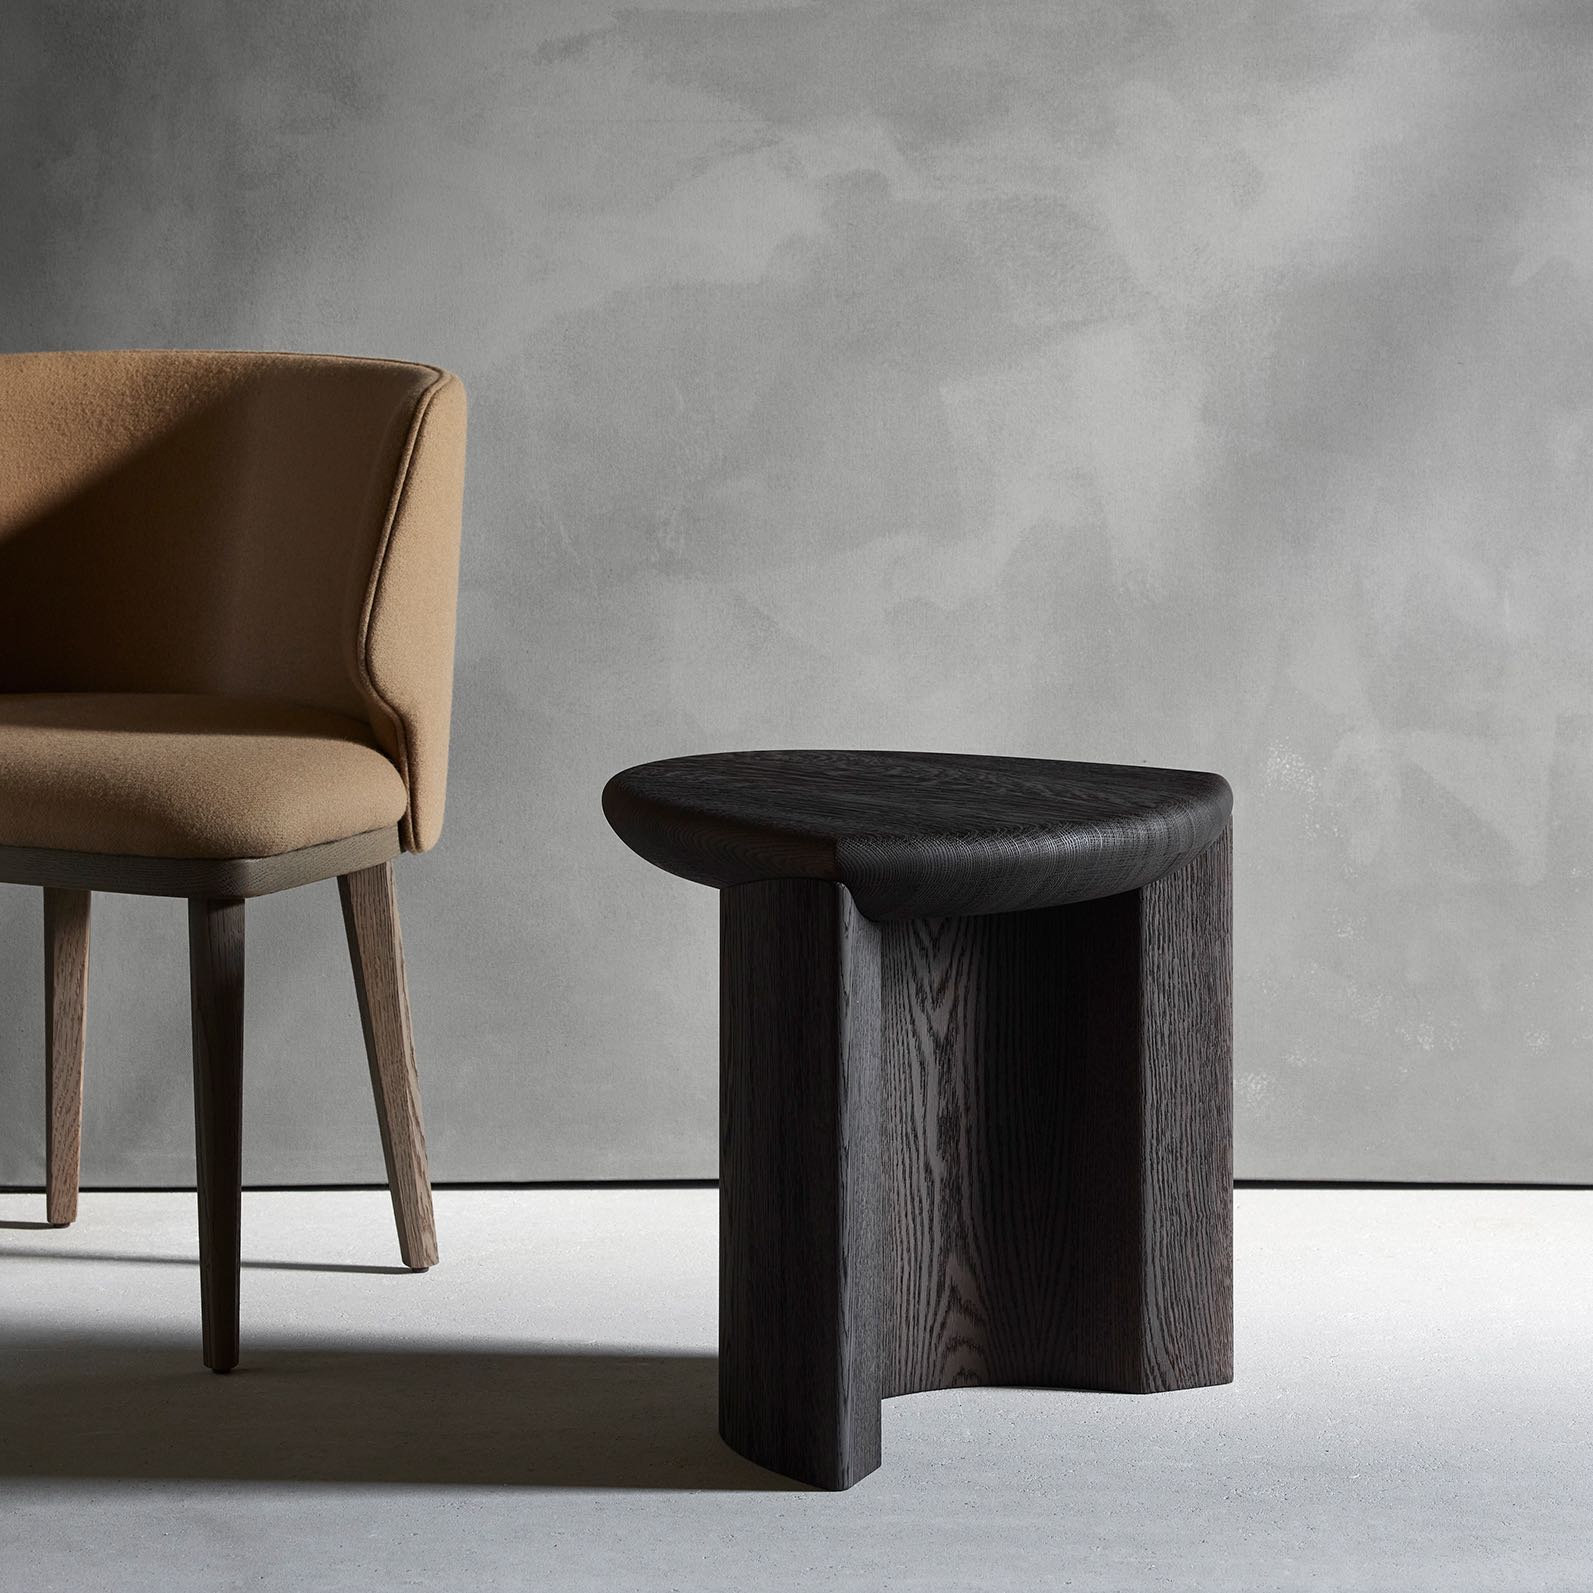 LADY-R-SIDE-TABLE-BRUSHED-SMOKED-OAK_LUCA-ERBA_COLLECTION_PARTICULIERE-CREDIT_PHOTO-F_AMIAND